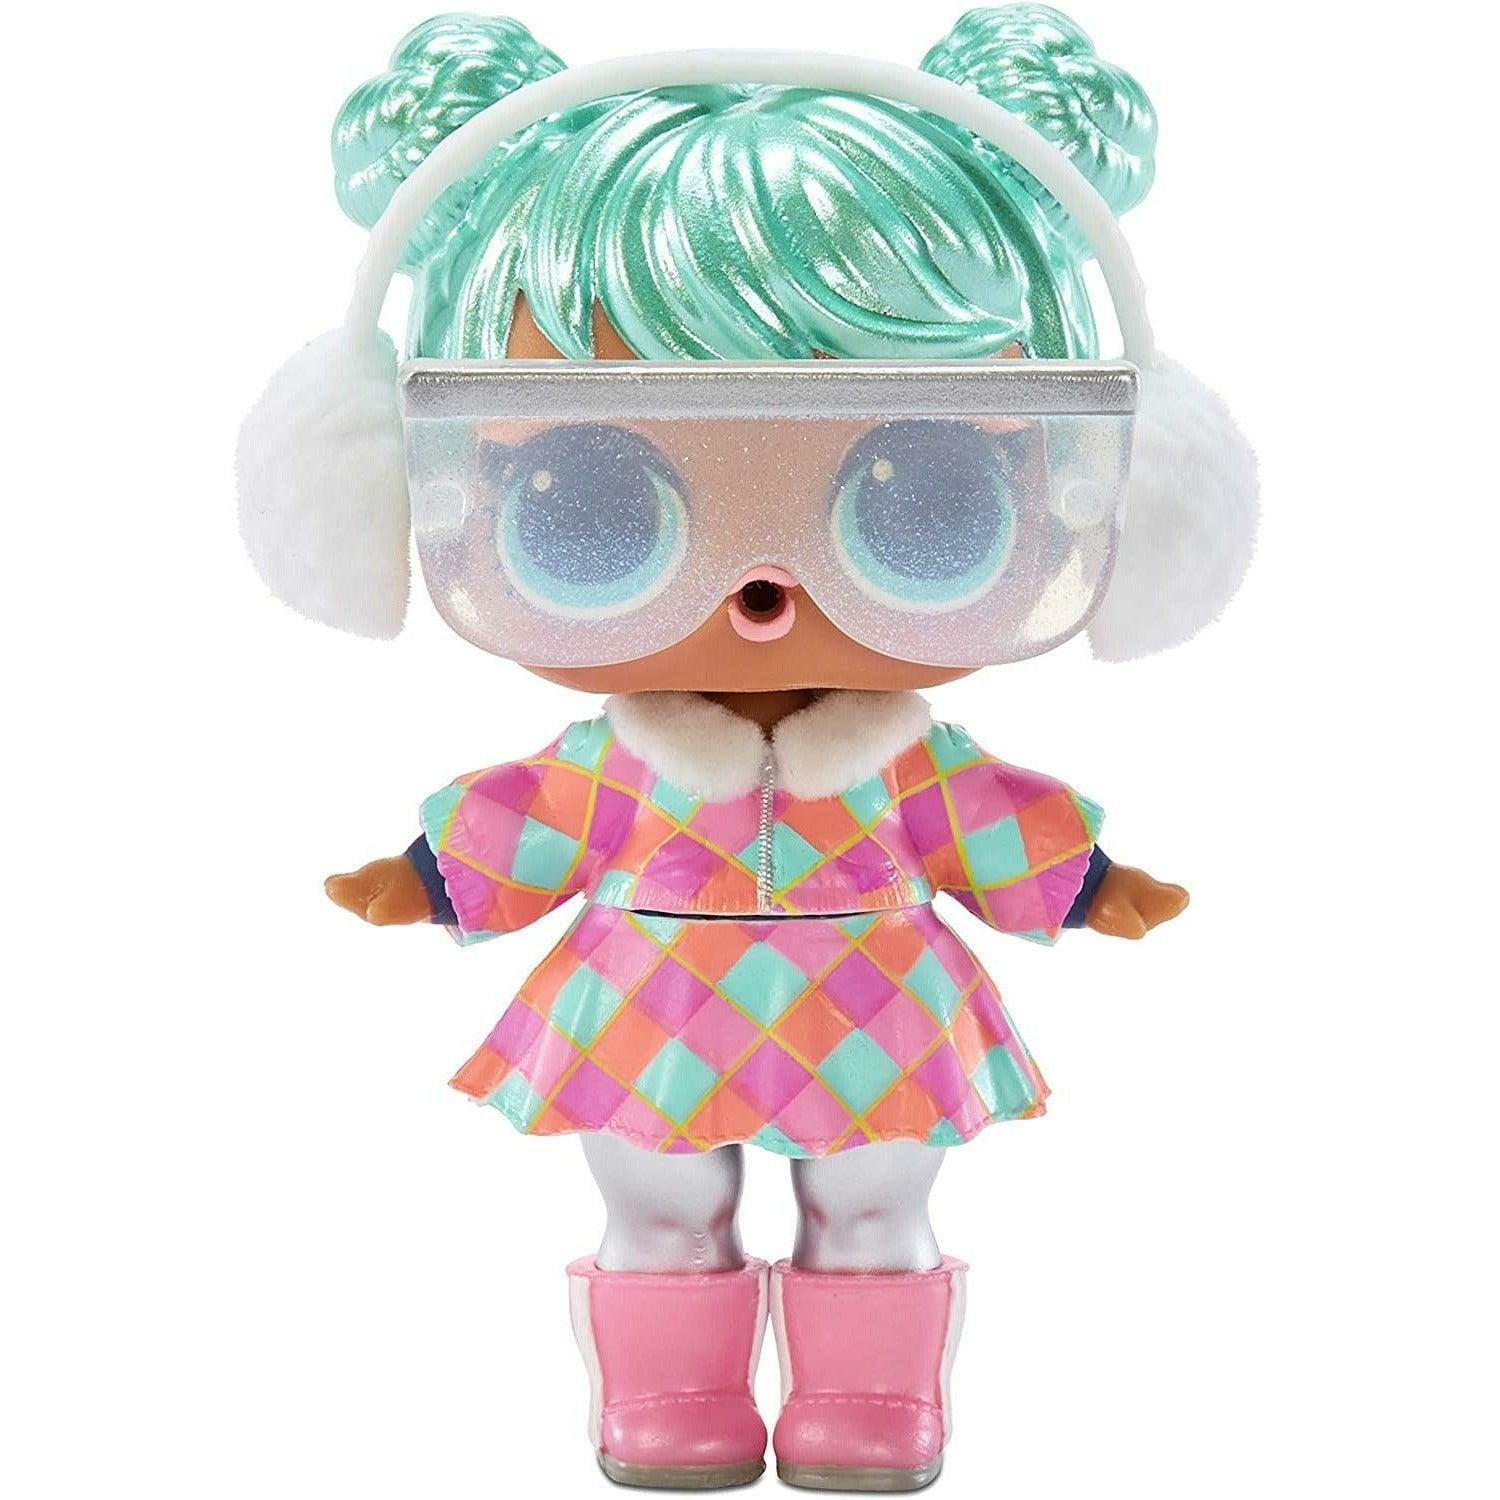 L.O.L Surprise Winter Chill Confetti Surprise Dolls with 15 Surprises Including Collectible Doll with Holiday Fashion Outfits, Accessories - BumbleToys - 5-7 Years, Dolls, EXO, Fashion Dolls & Accessories, Girls, L.O.L, Pre-Order